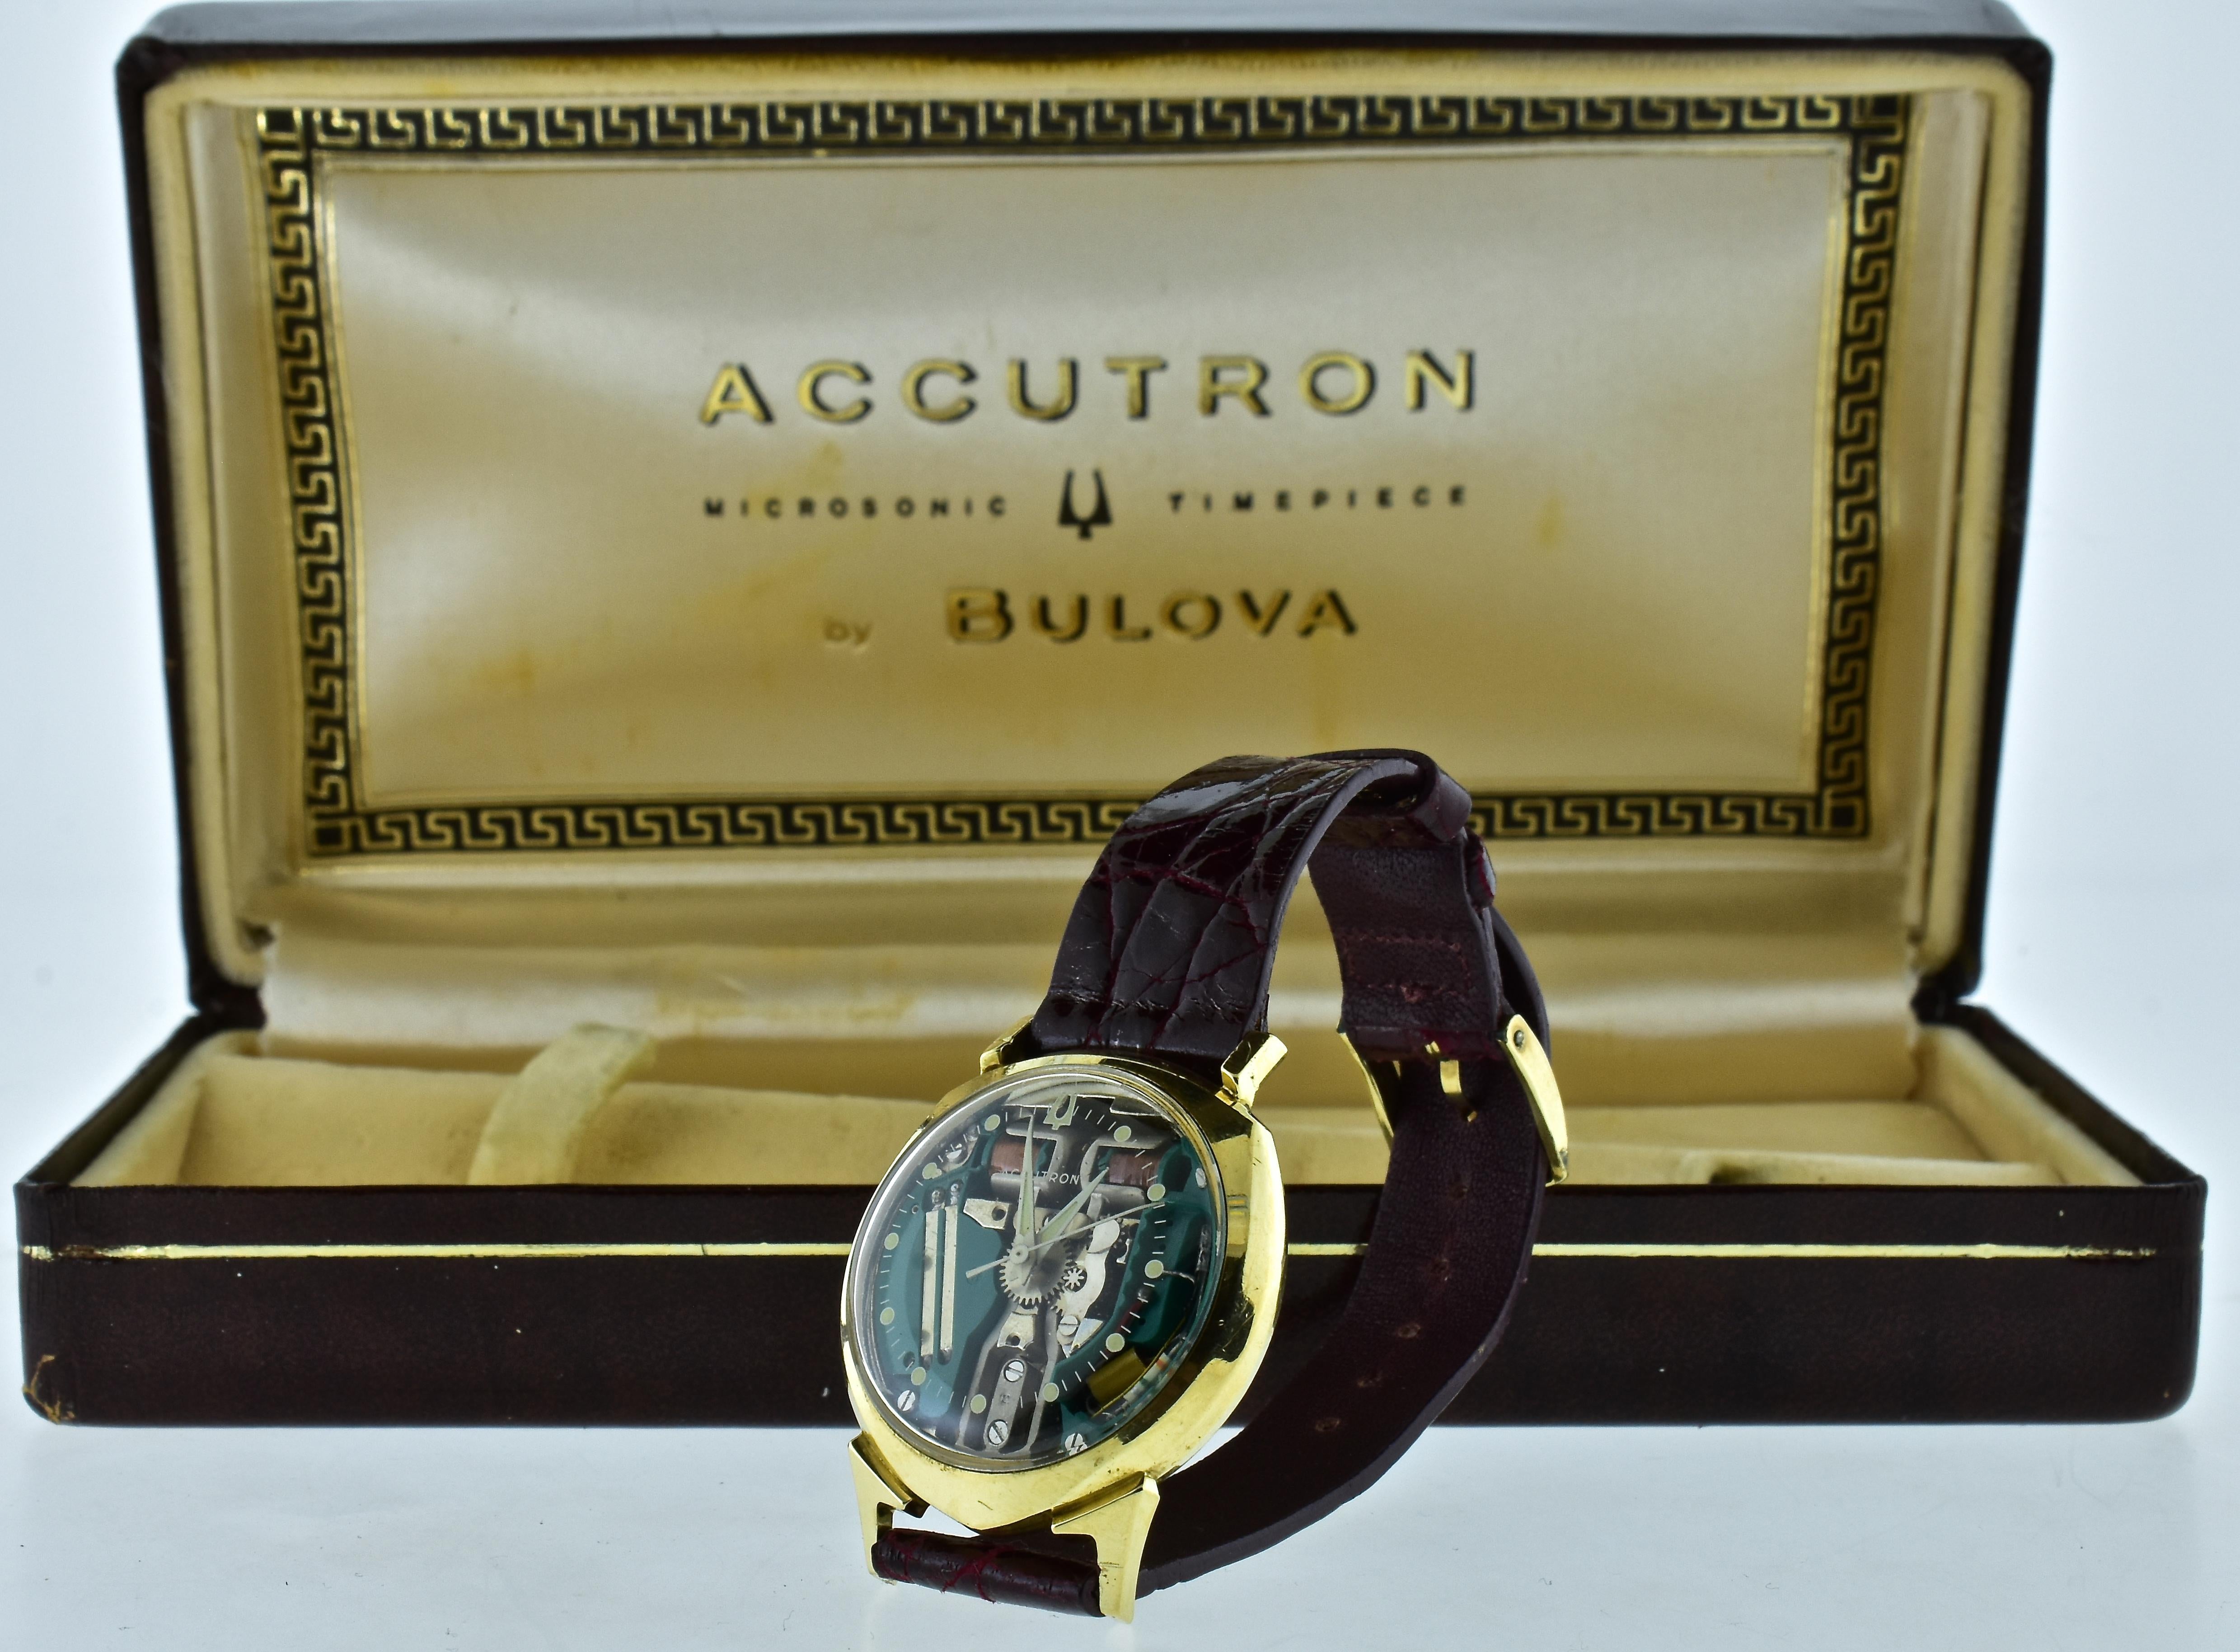 Spaceview D gold wristwatch by Bulova from the early 1960's, this watch was never worn and remains in fine condition.  The watch is accompanied by the original box, original Accutron buckle (signed Accutron, the watch is 14K gold, however this